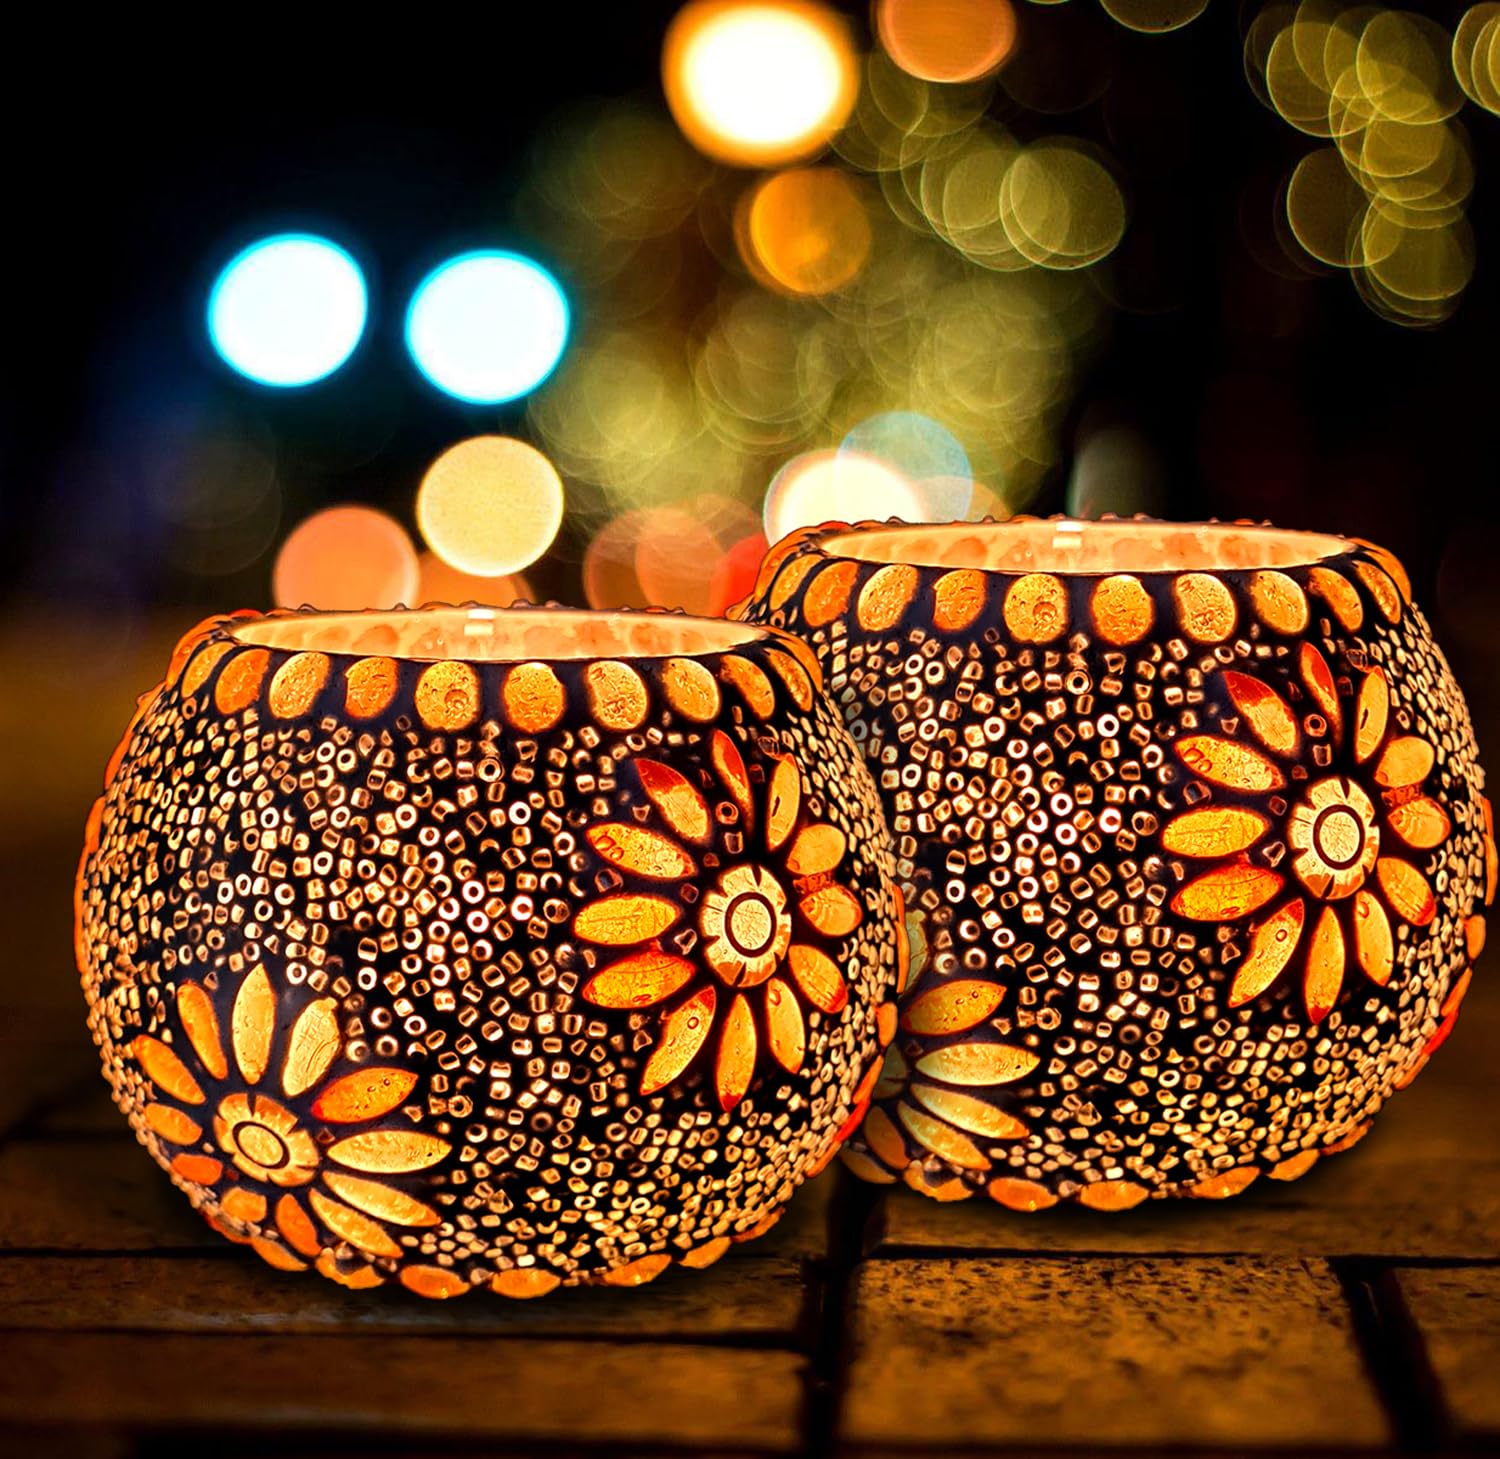 Two colorful decorative lamps with intricate designs, adding a vibrant touch to any space.